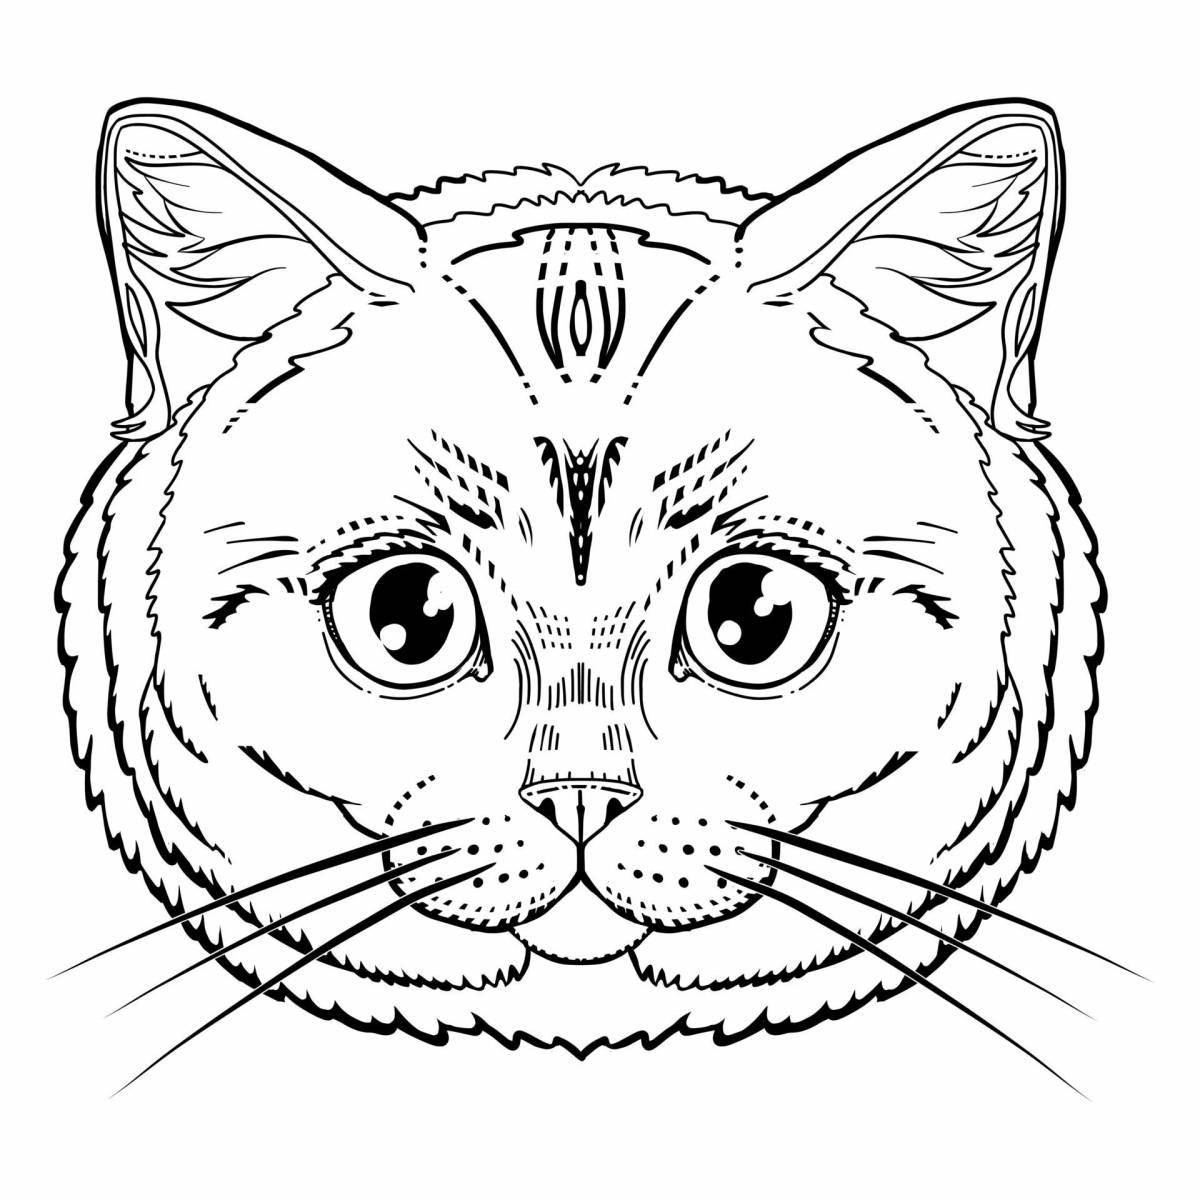 Coloring page beautiful cat mask